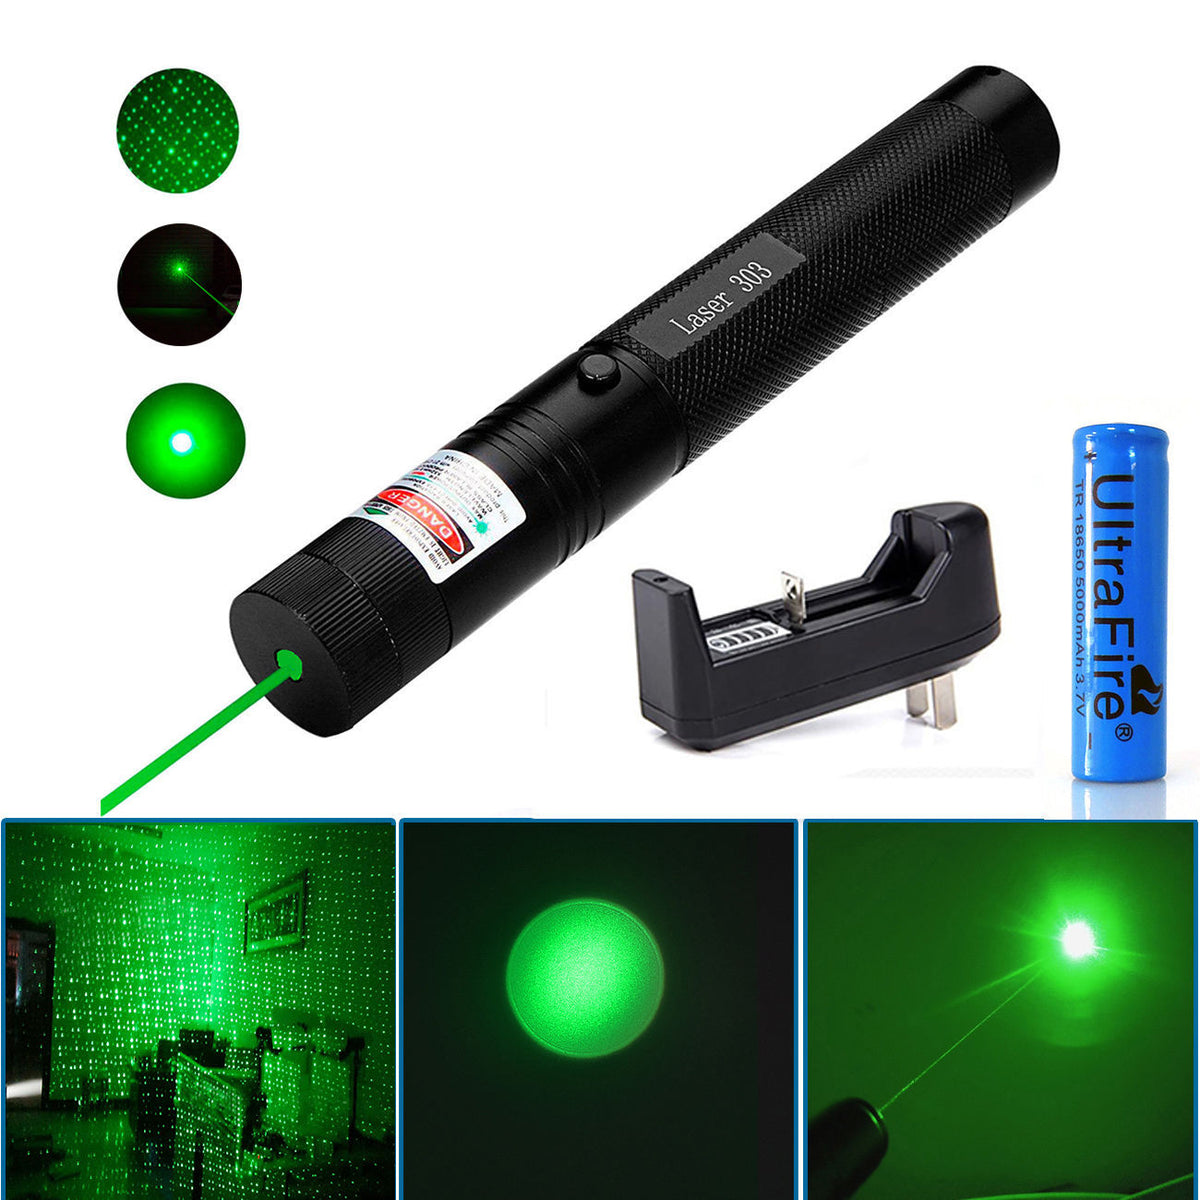 Powerful Green Laser Pointer 532nm 50mw, Green Beam - Includes Rechargeable Battery and Charger